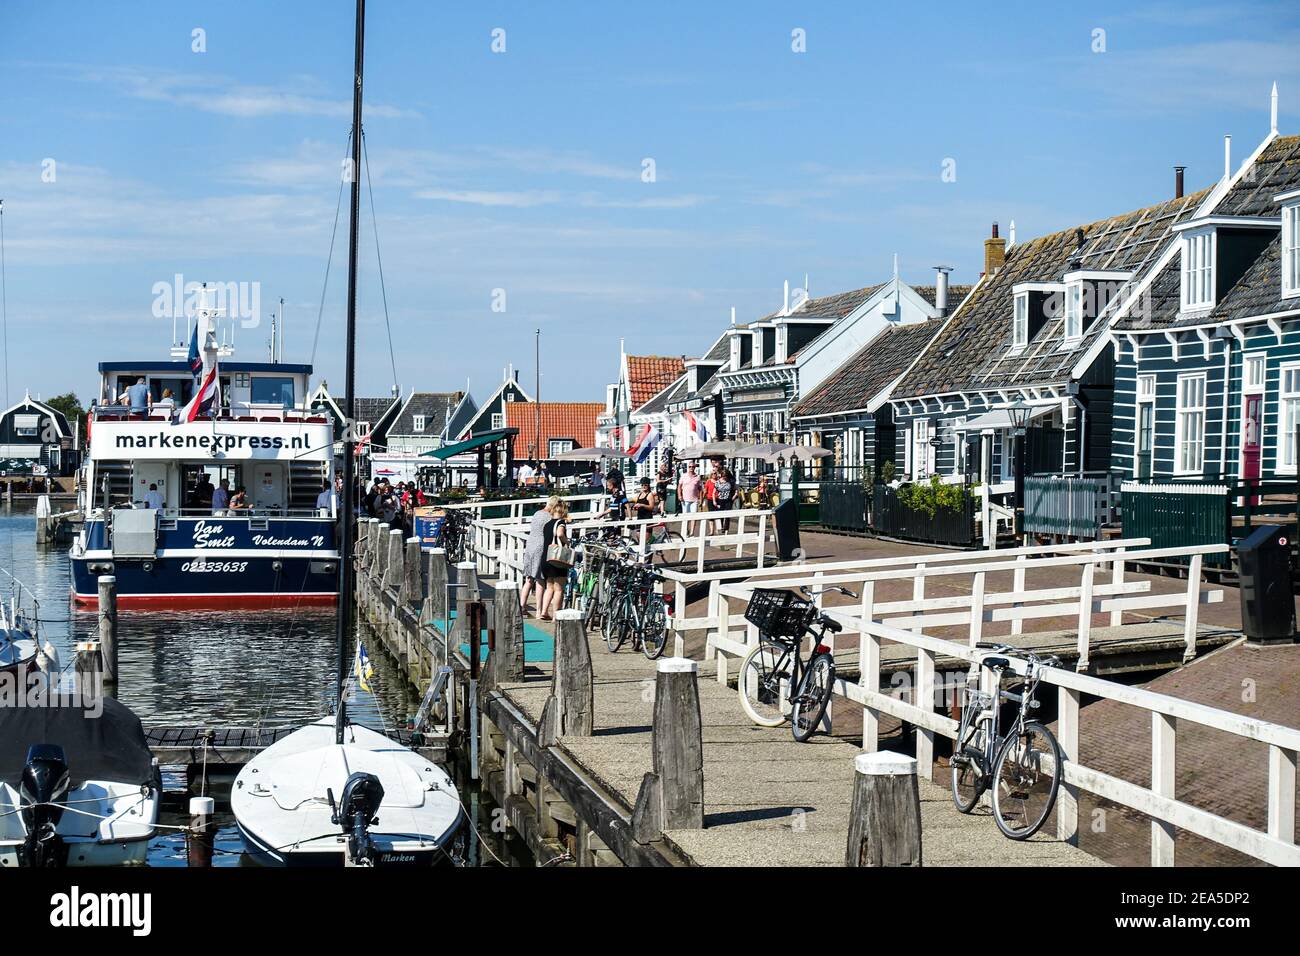 During the pandemic, a few visitors waiting on the quay of the quaint, typical Dutch village and port of Marken, North Holland, Netherlands Stock Photo